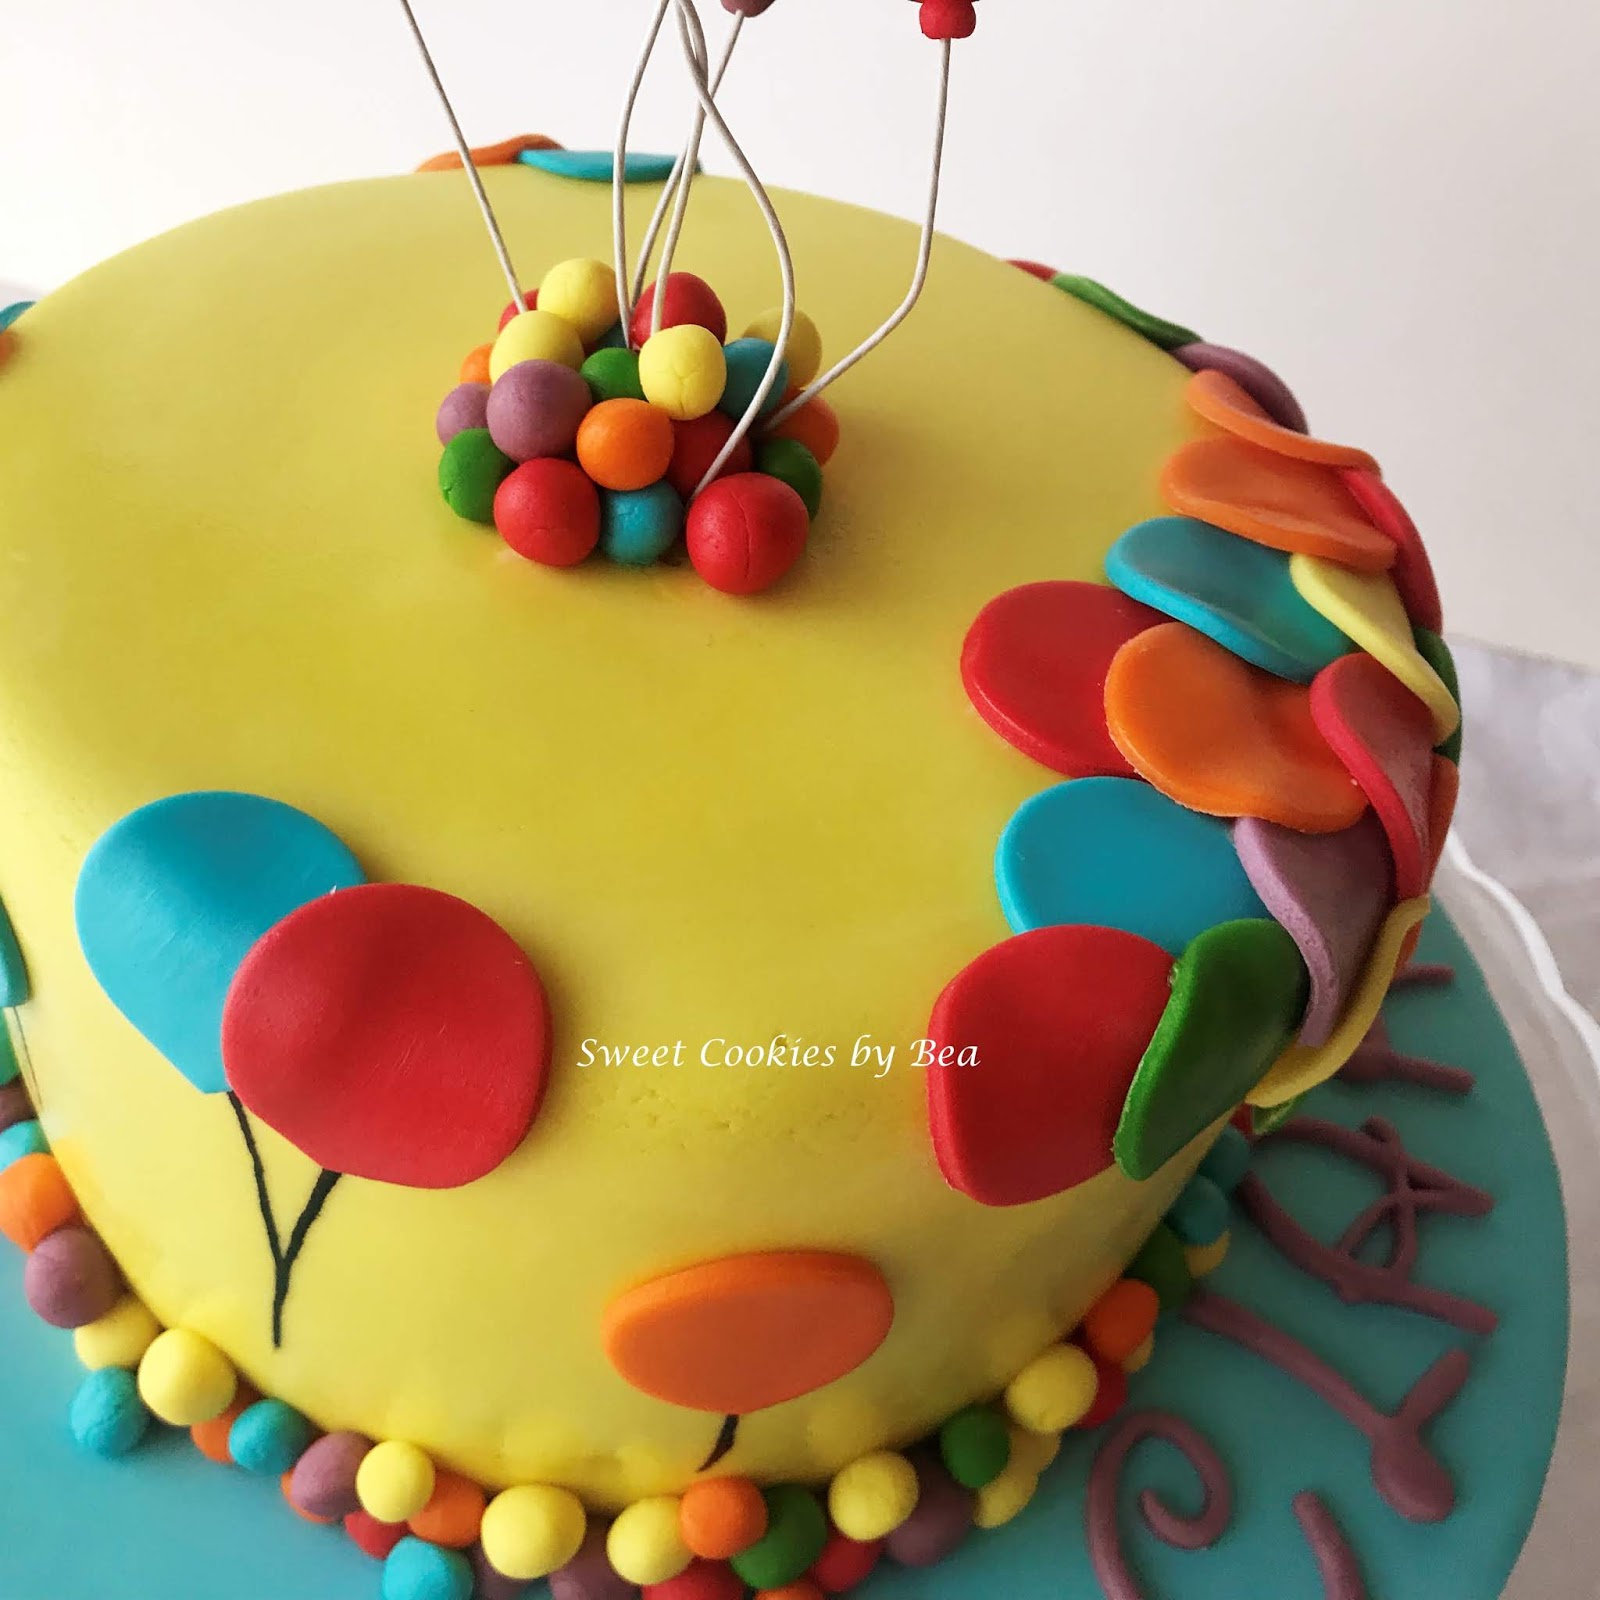 Sweet Cookies by Bea: My Little Chinche cumple 2 años